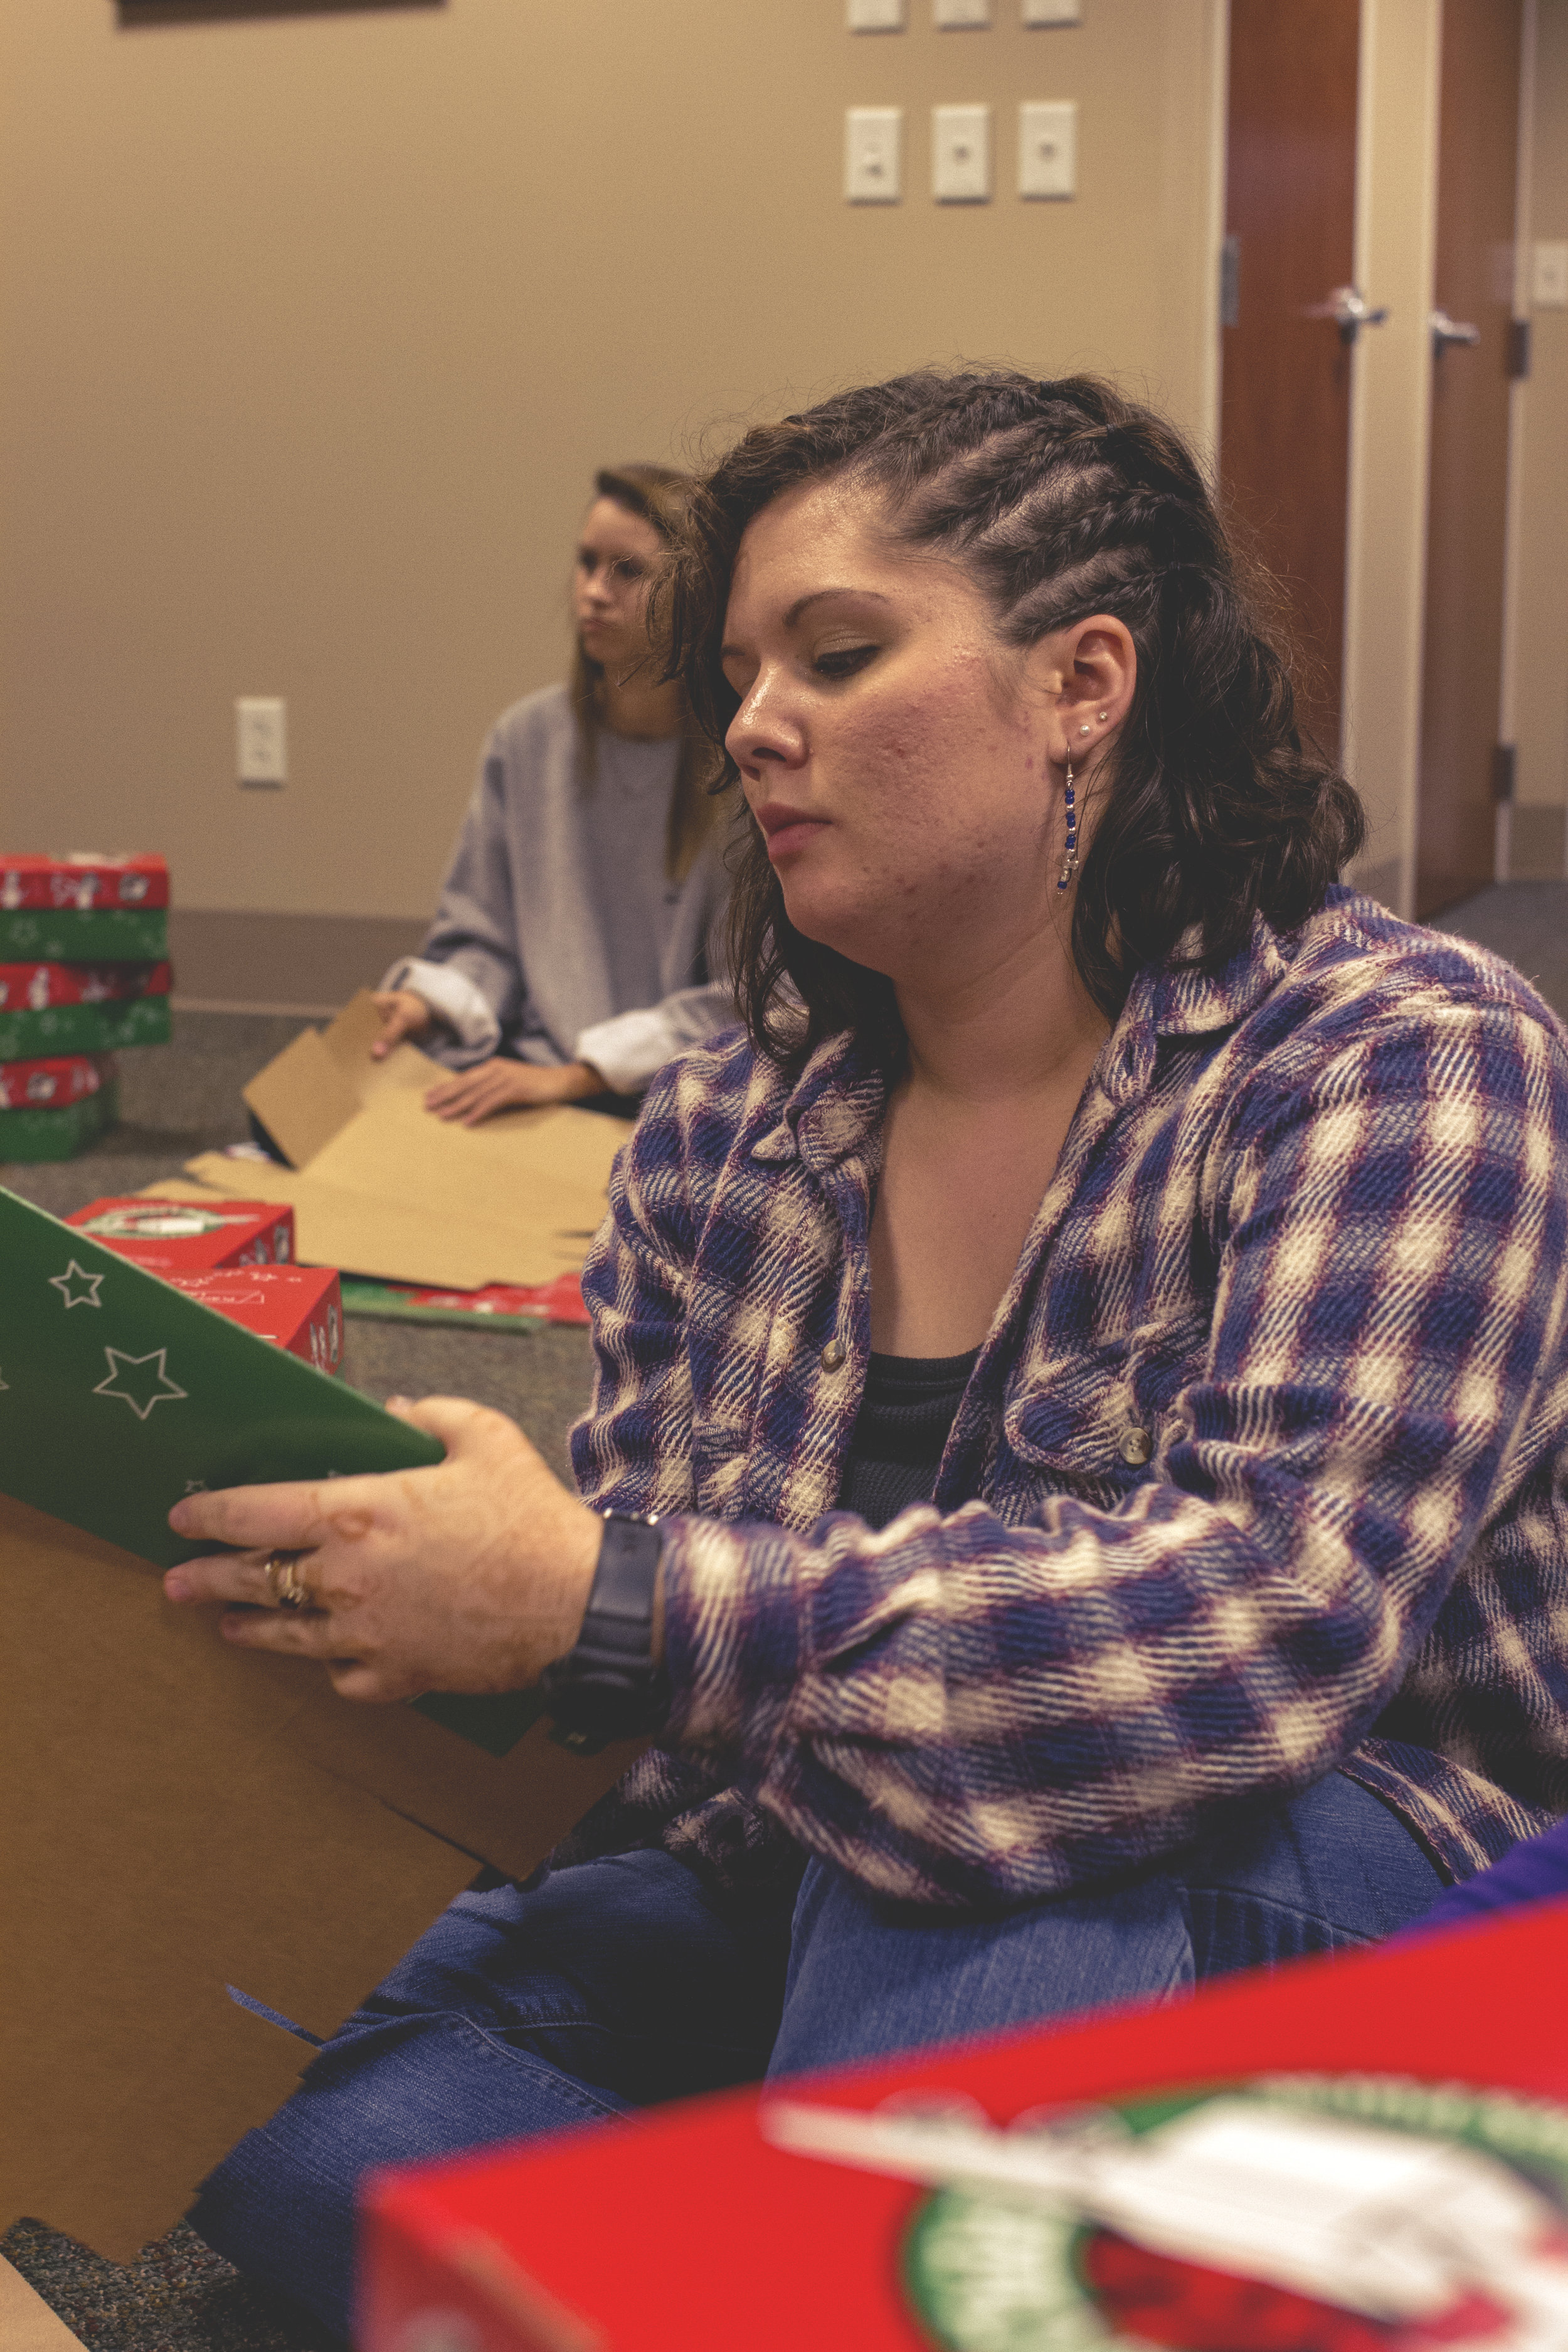  Anne Williams major at NGU involves working with kids and she is very passionate about them. When the opportunity to be a part of this arose, she decided to come. She stated, &nbsp;"As Christians, it is our job to show love." This was one way she fe